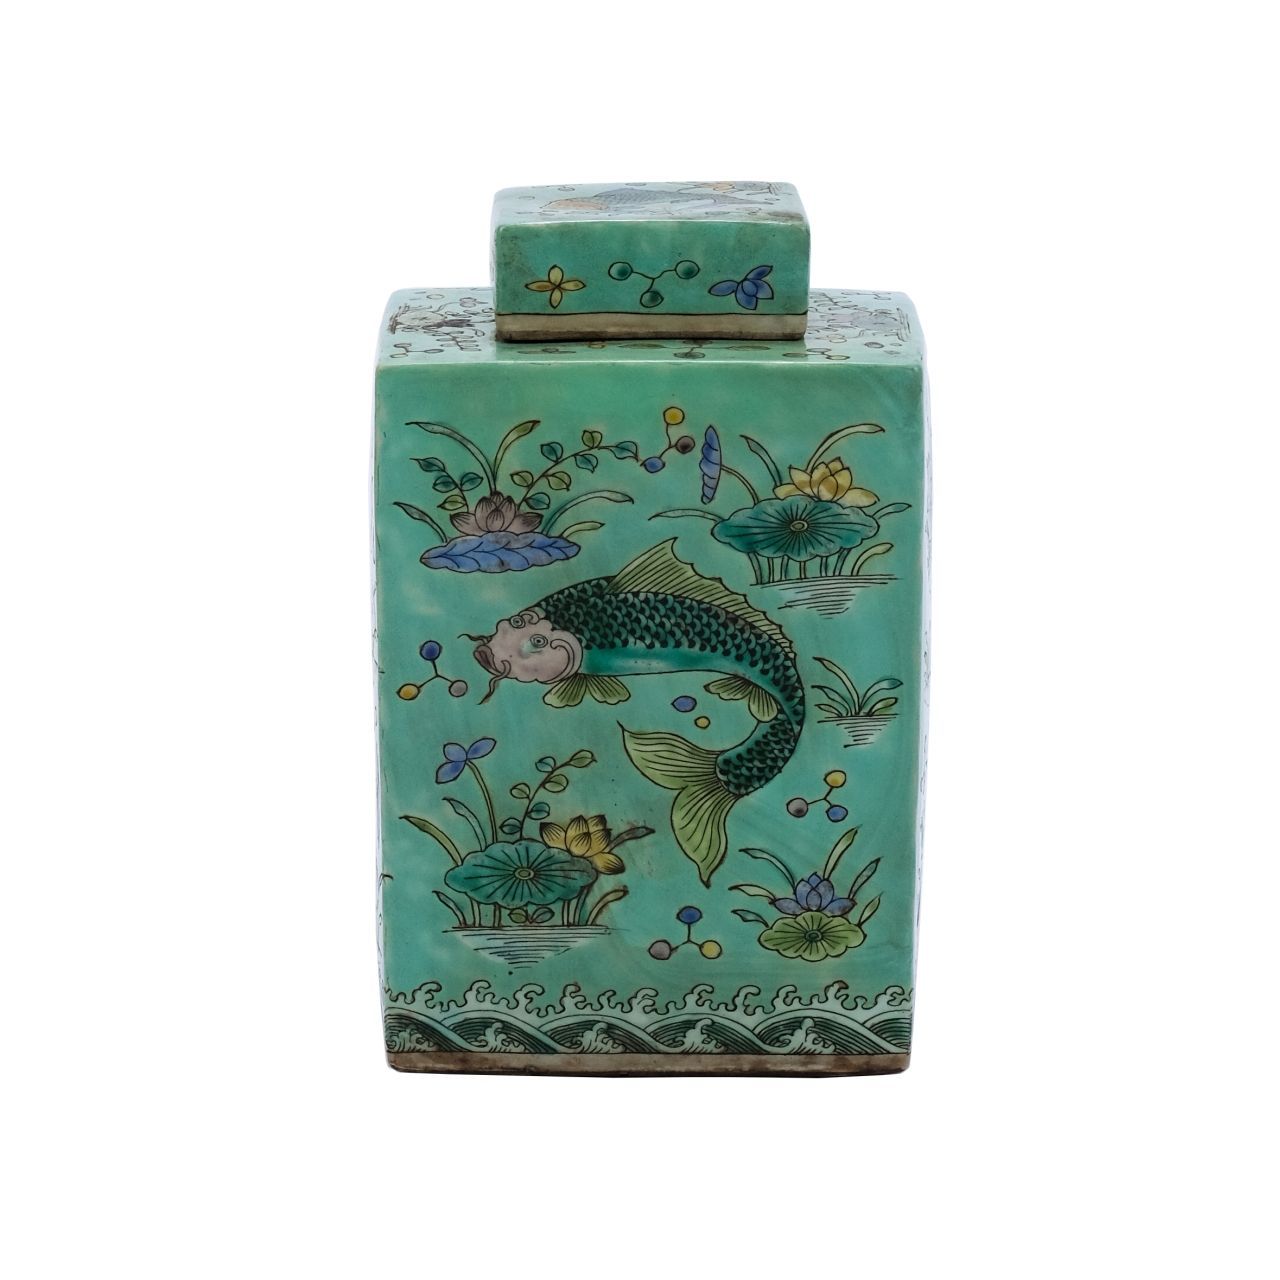 Porcelain  Nature  Jar  Green  Fish  Decorative Accessories  Chinoiserie  Asian  Animals  Animal